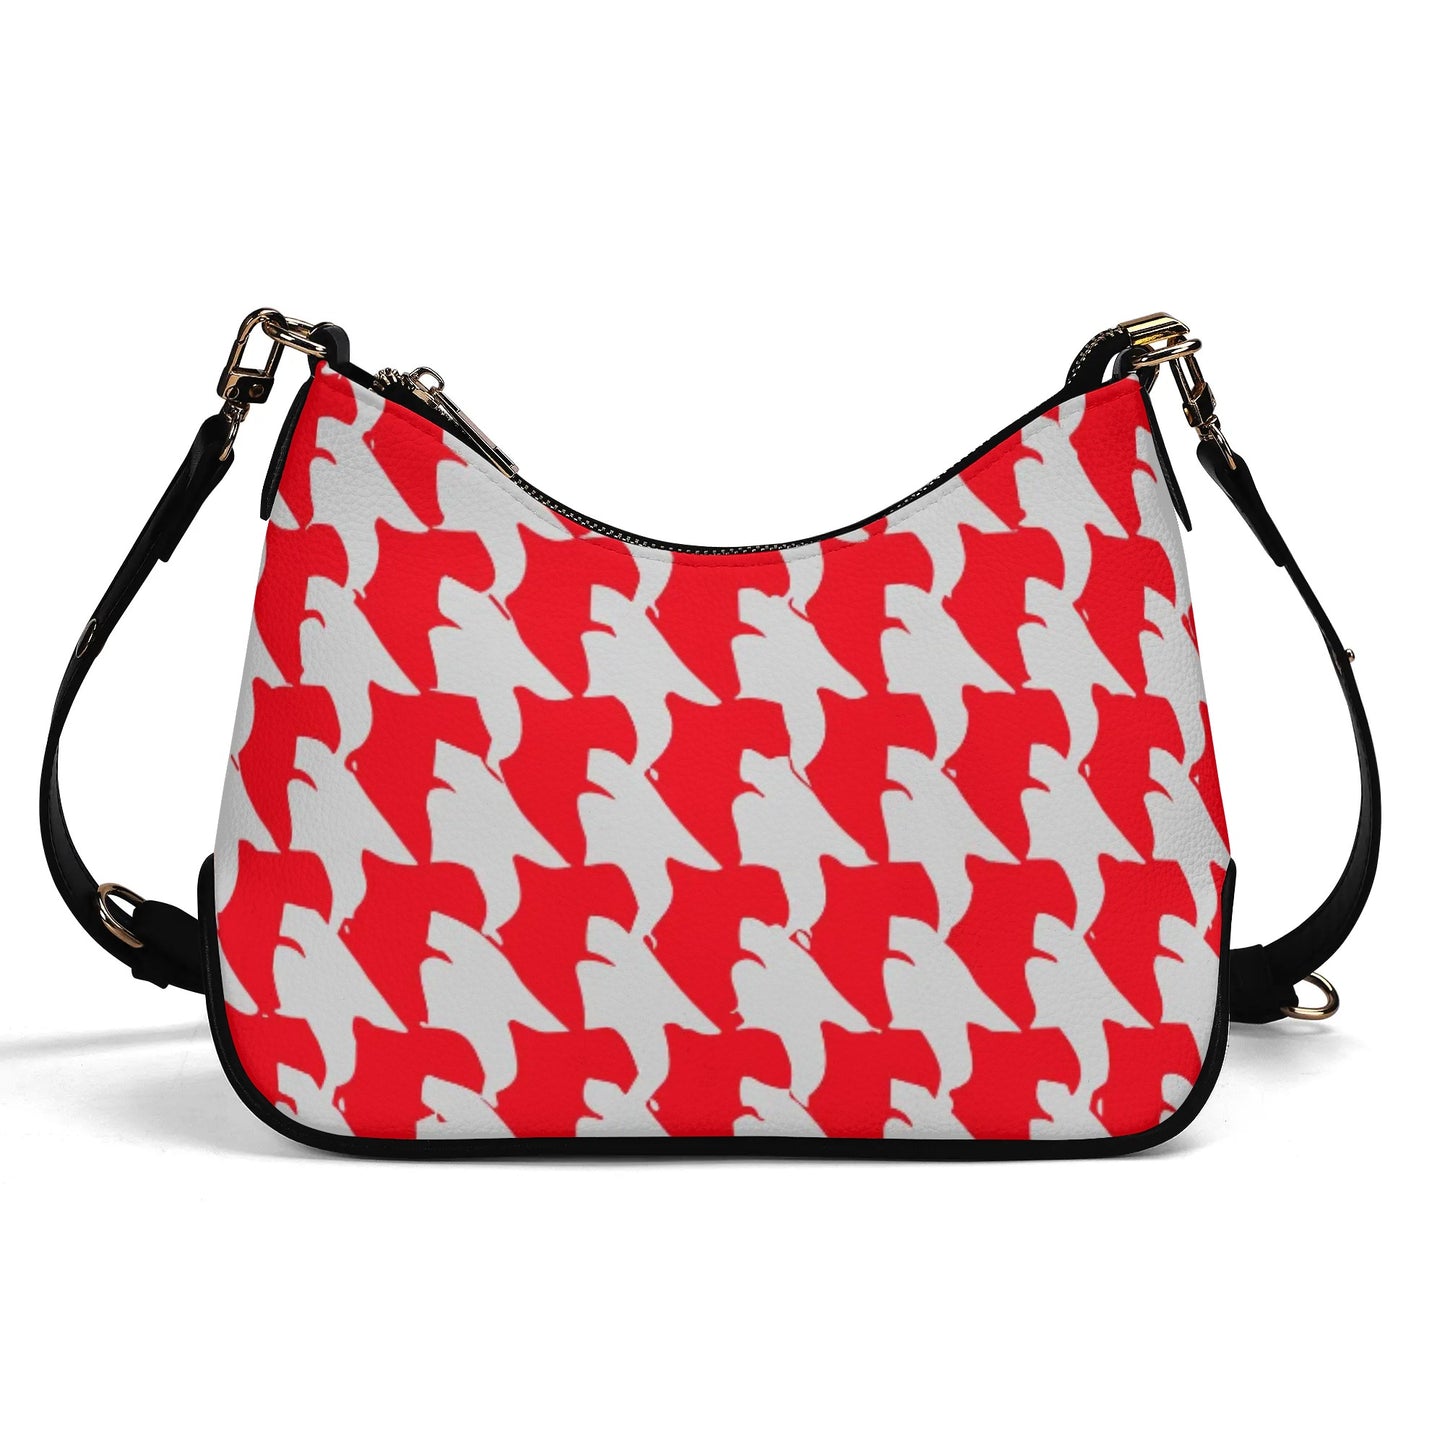 Vampire Art Grunge PU Cross-body Bag With Chain Decoration - Red Houndstooth